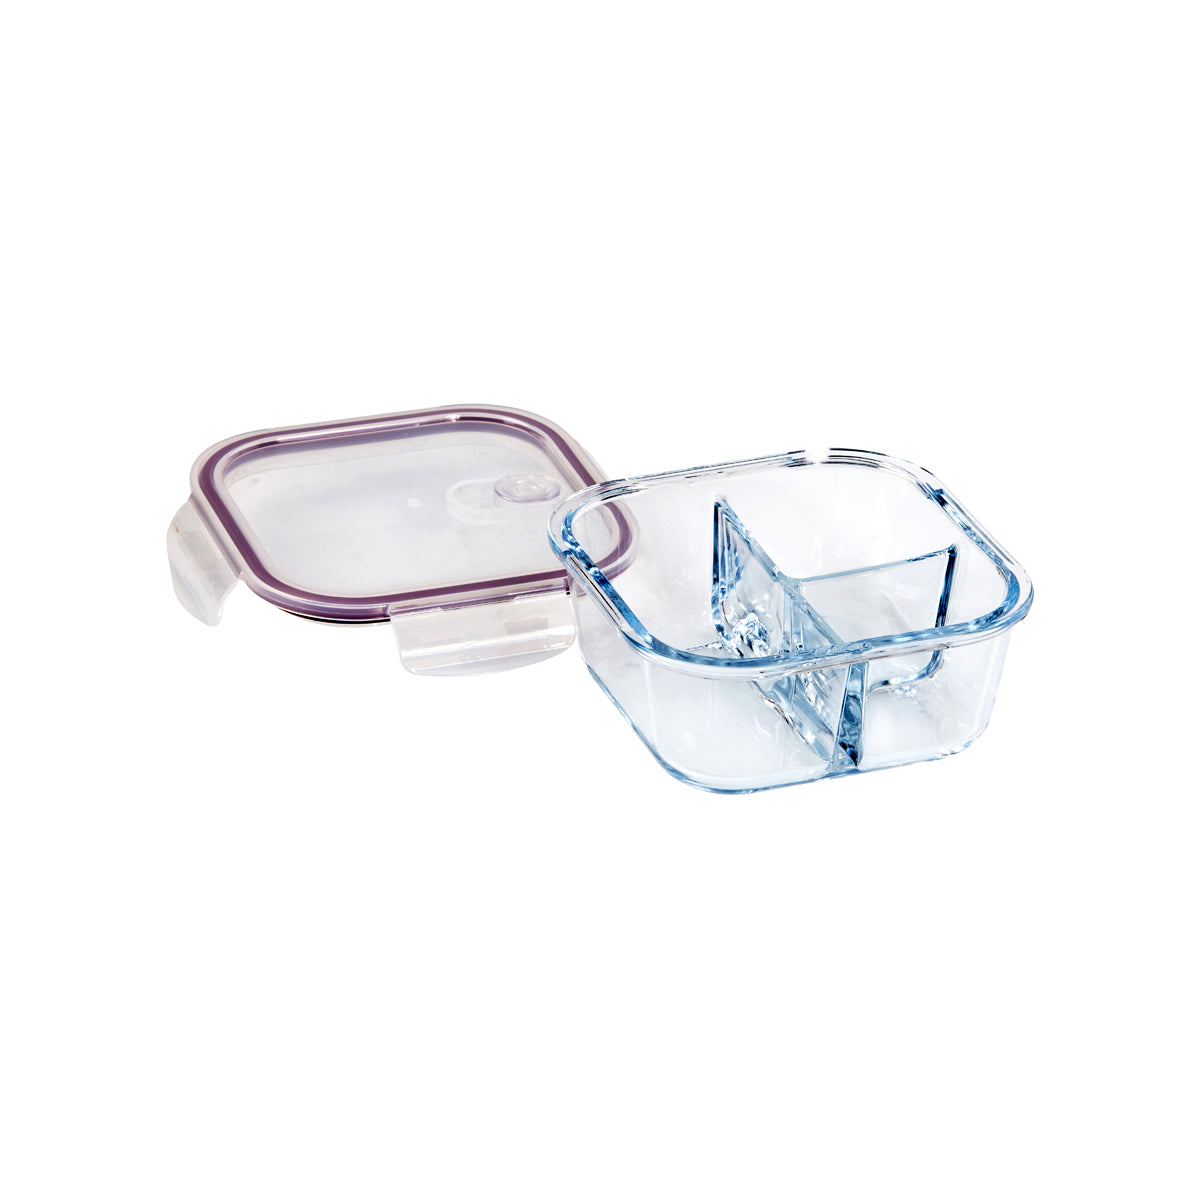 ETR48144 Eterna Glass Containers 3 Divider Square 800ml Tomkin Australia Hospitality Supplies